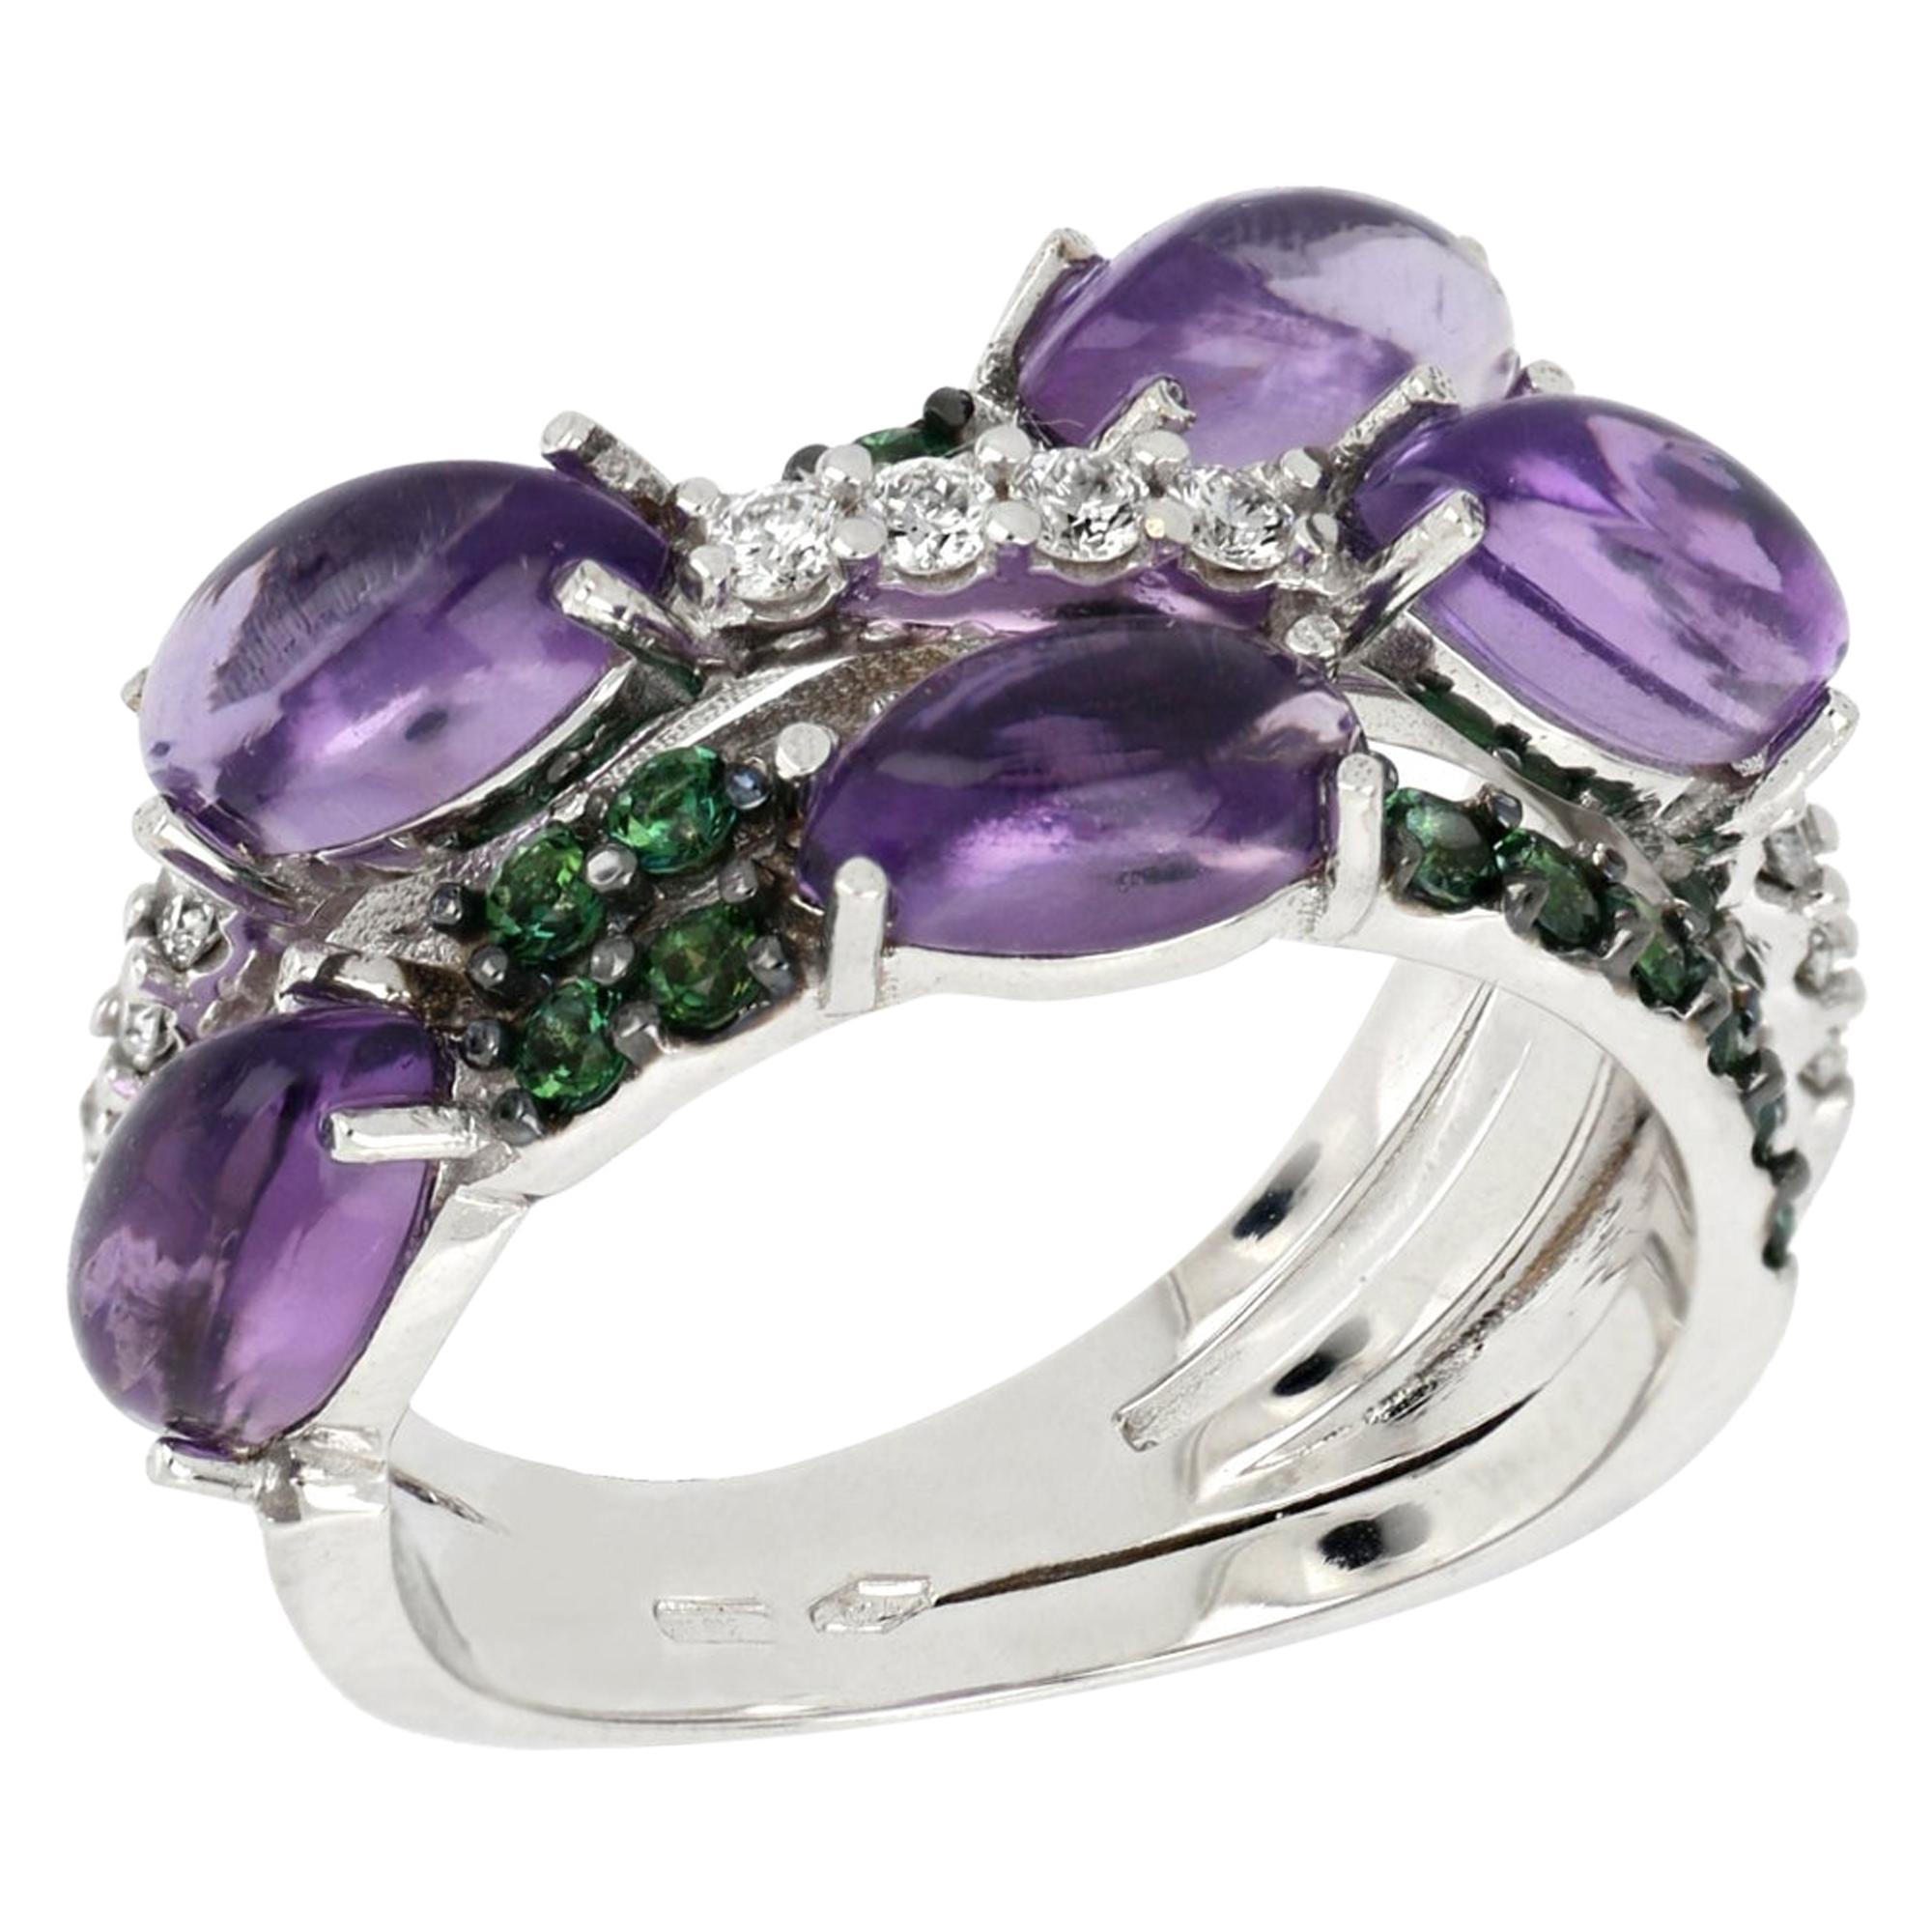 18kt White Gold Les Papillons Purple Amethyst Ring with Topazes and Diamonds